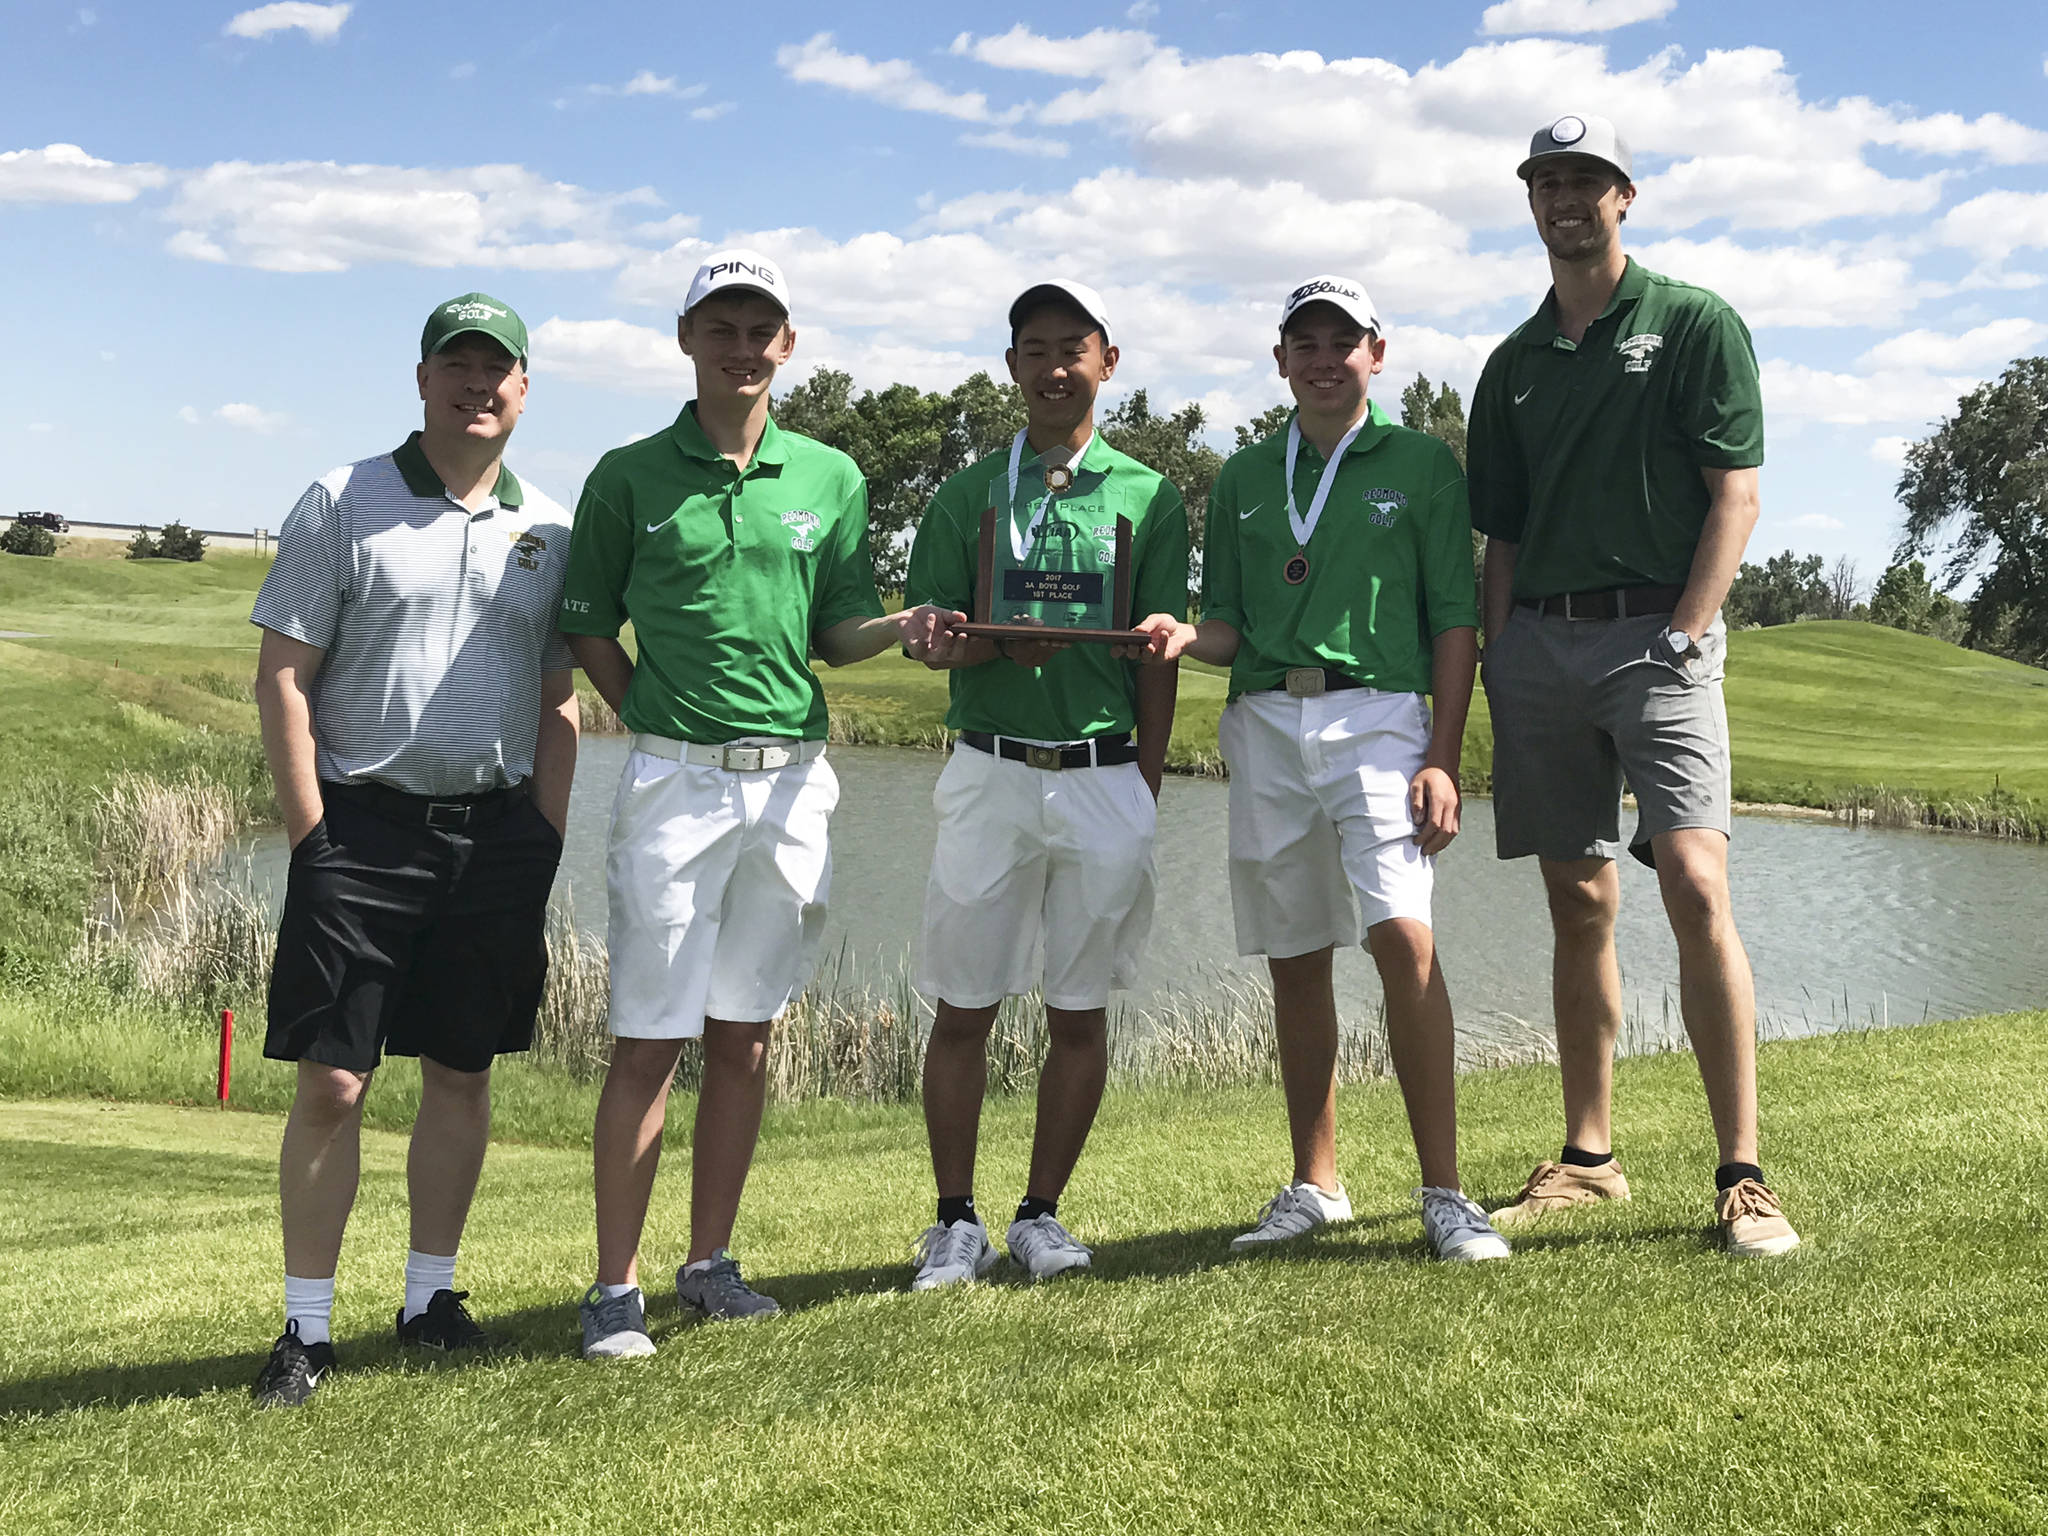 Redmond High’s golf crew at the 3A state tournament: From left to right, Steve Wiebe, Michael Cummings, Sean Kato, Connor Golembeski and Spencer Burnstead. Courtesy photo